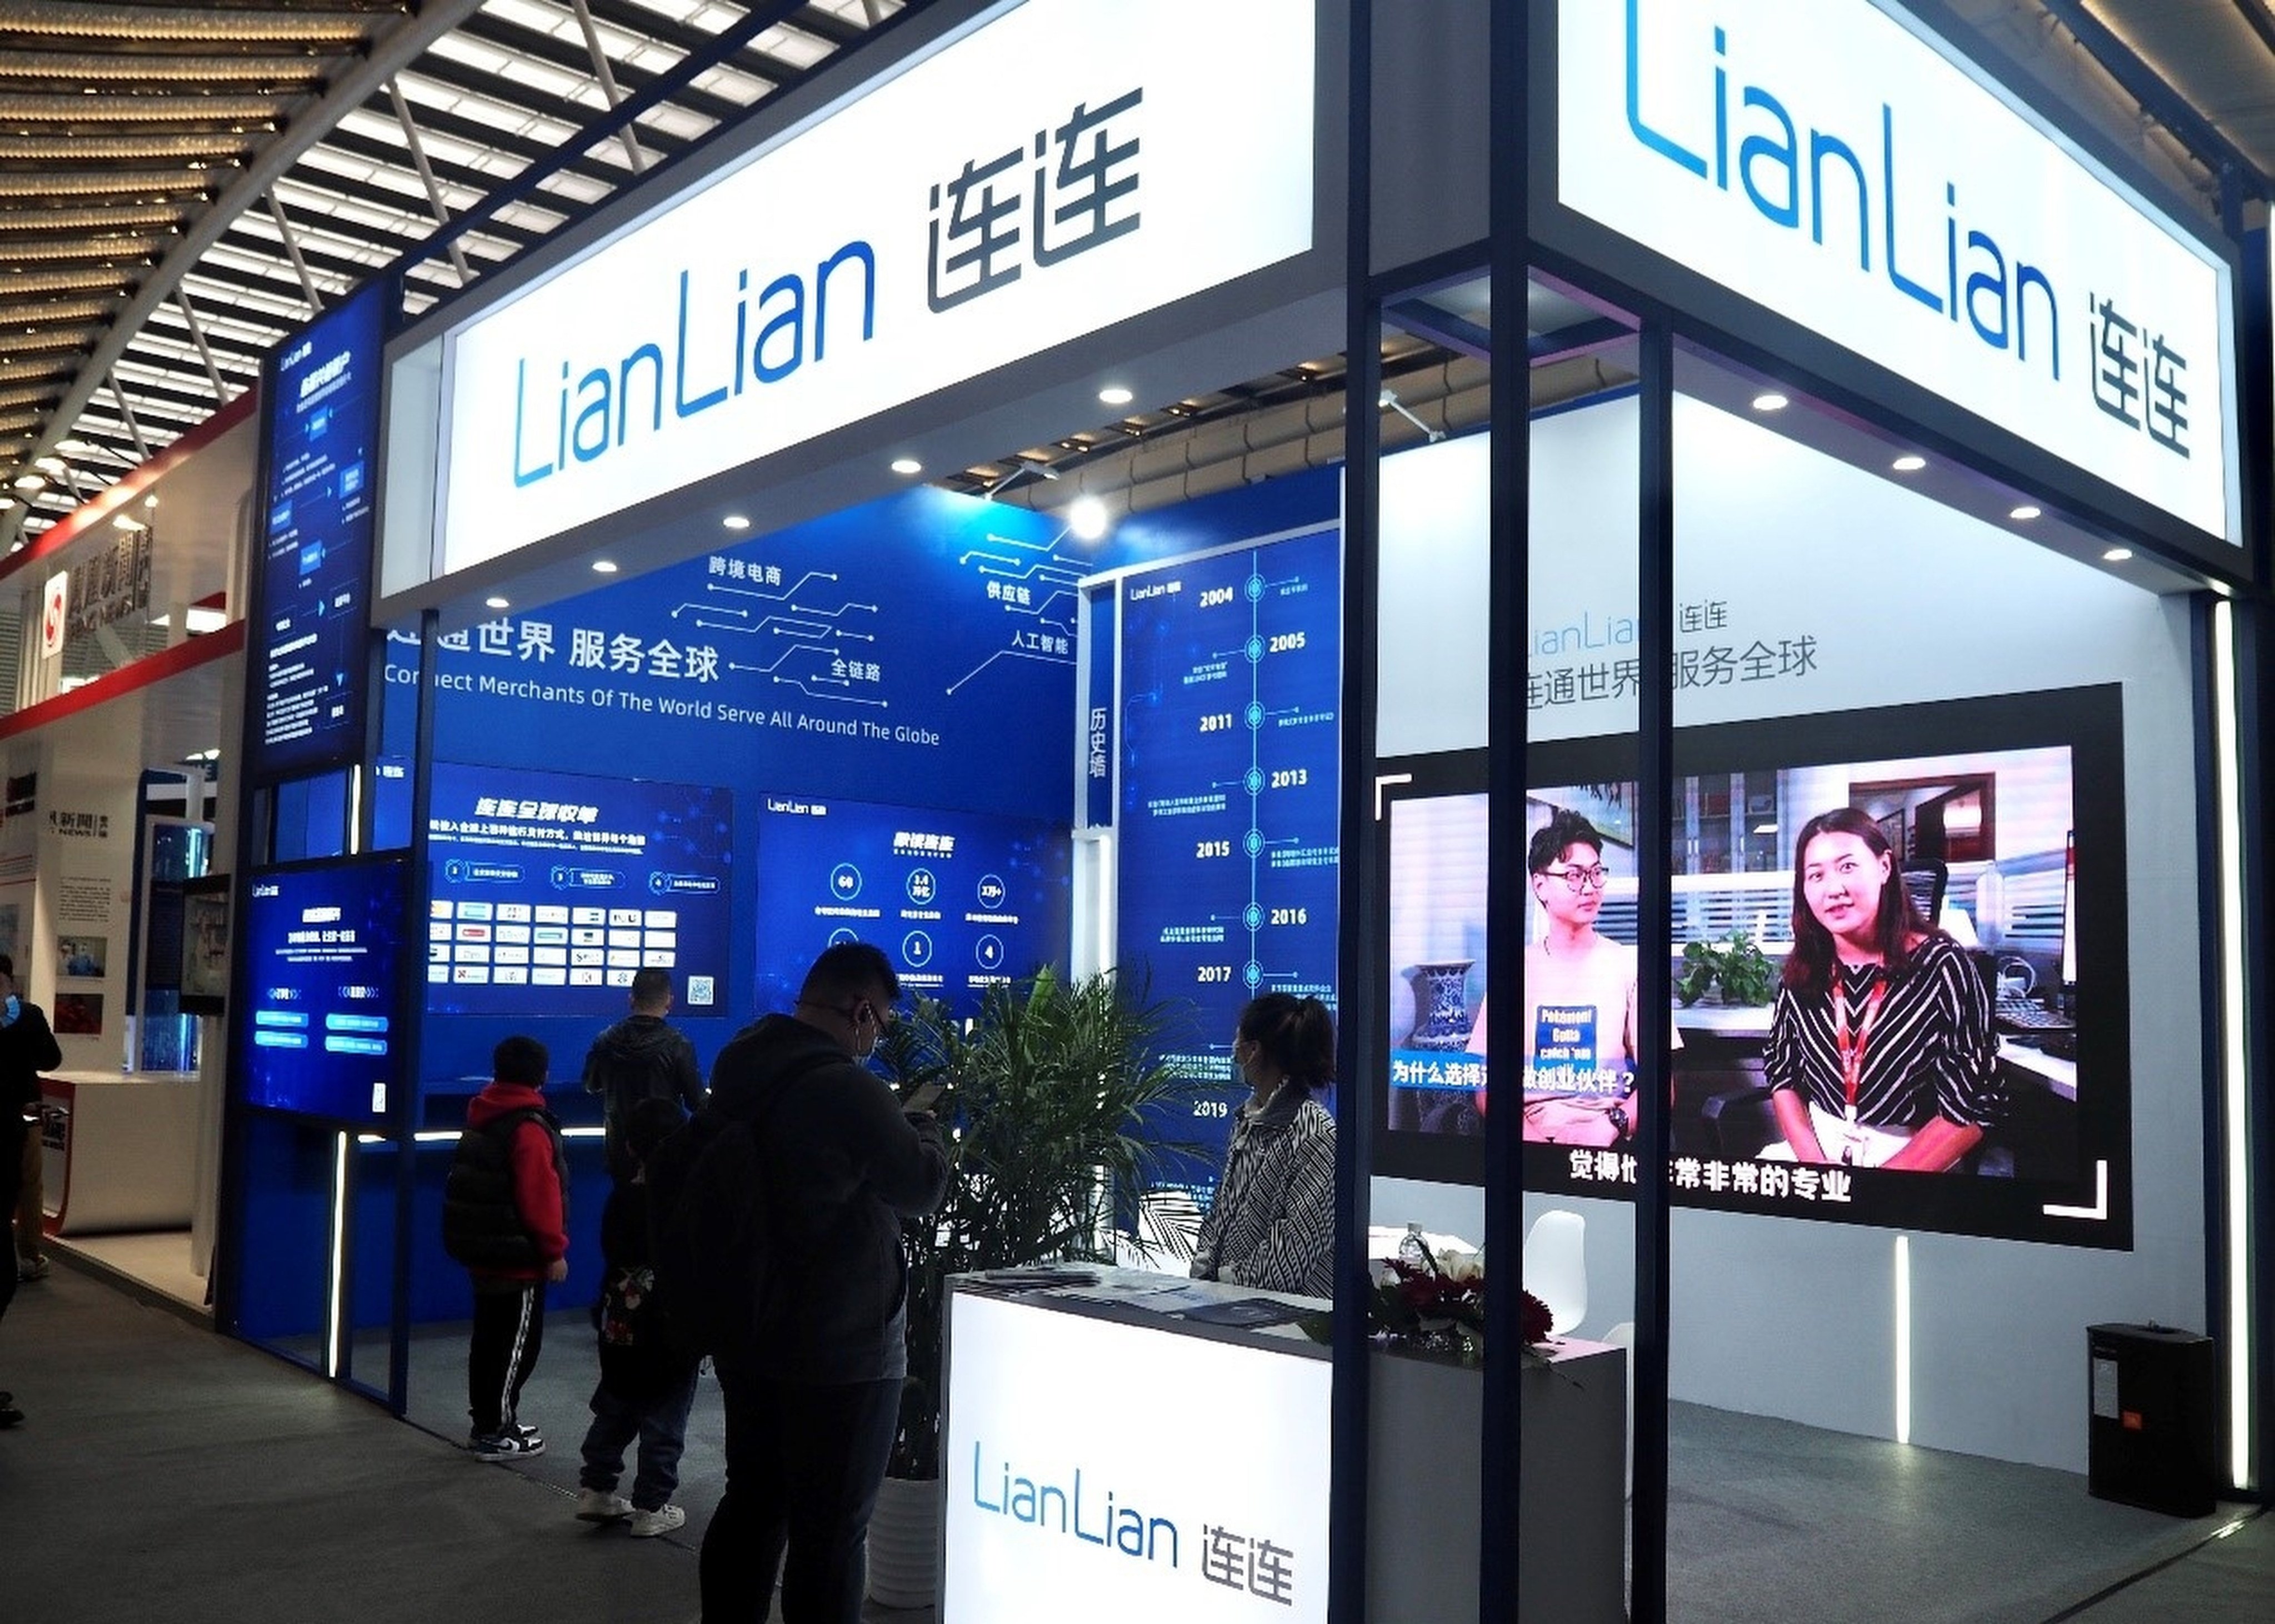 A booth of LianLian DigiTech appears at The Light of Internet Expo during the 2020 World Internet Conference in Wuzhen, Zhejiang, China. Photo: LianLian